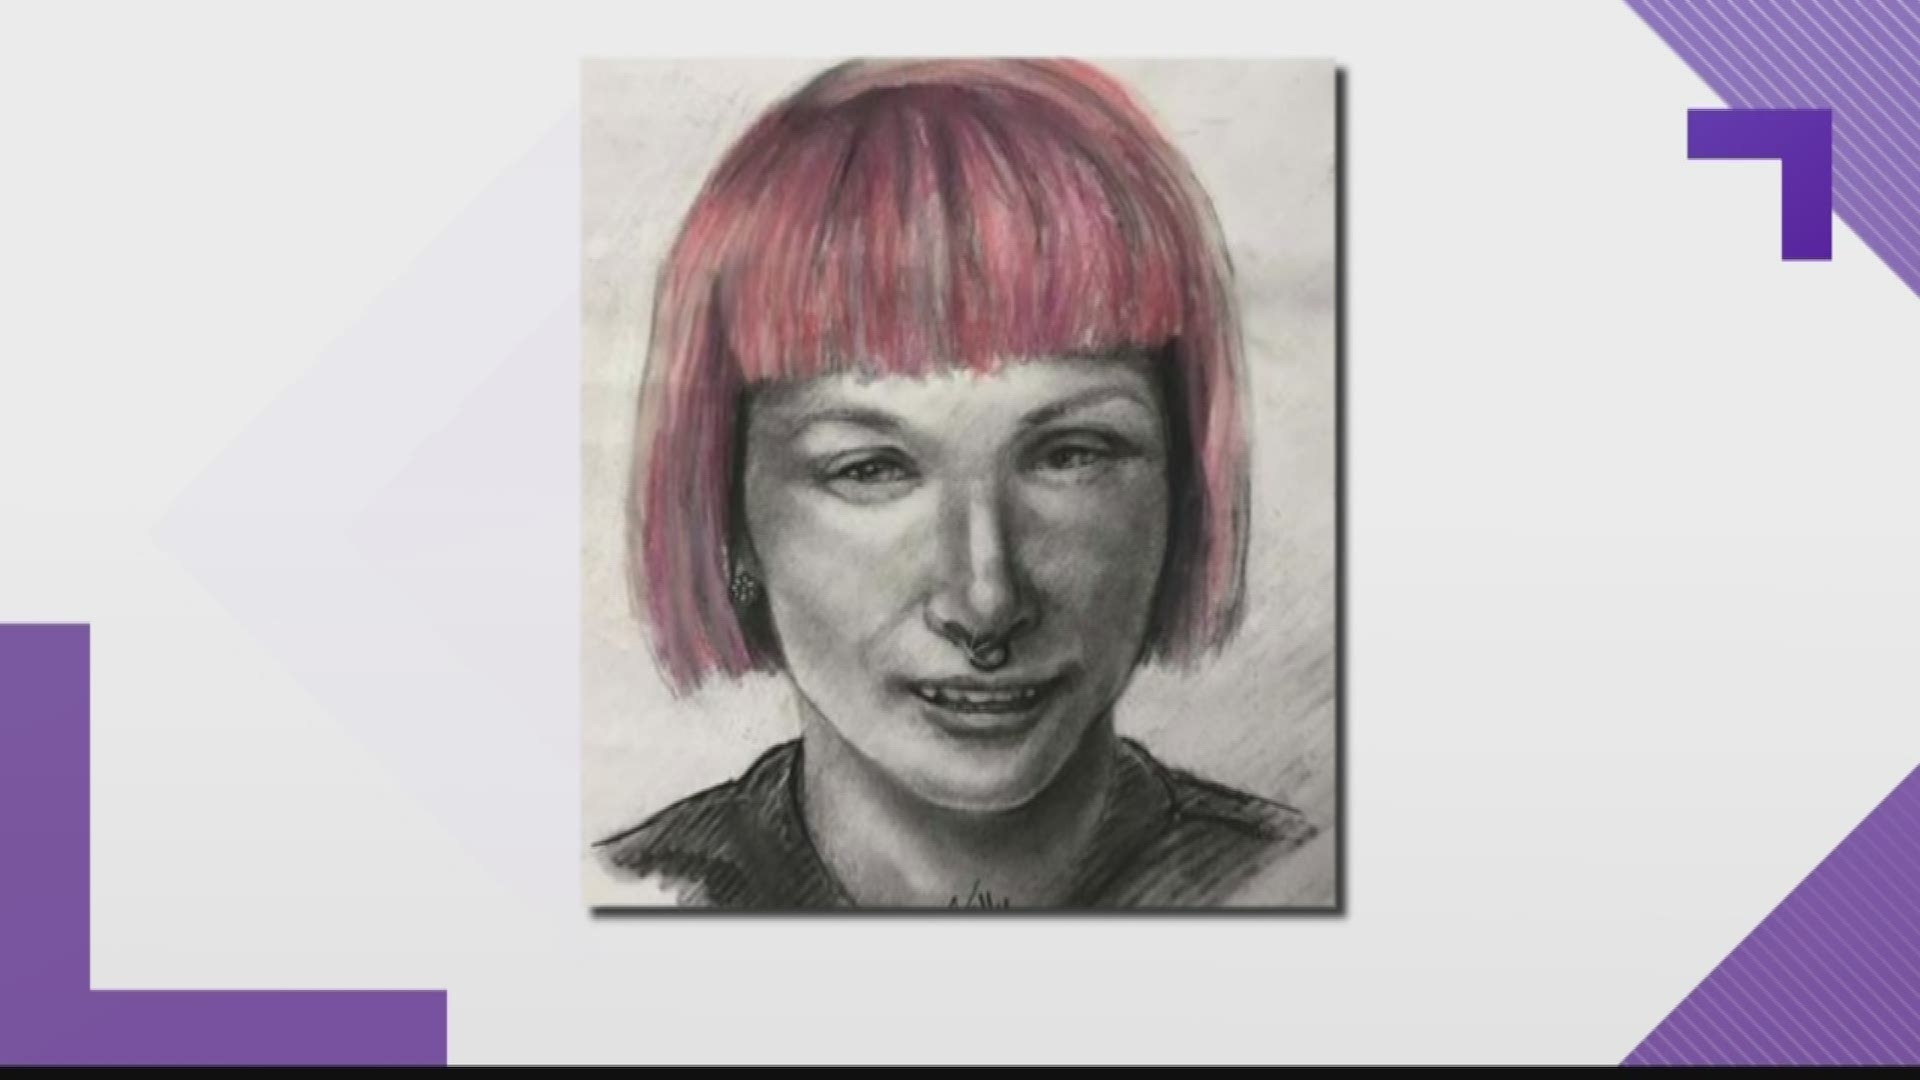 Authorities released a sketch. Do you recognize this person?